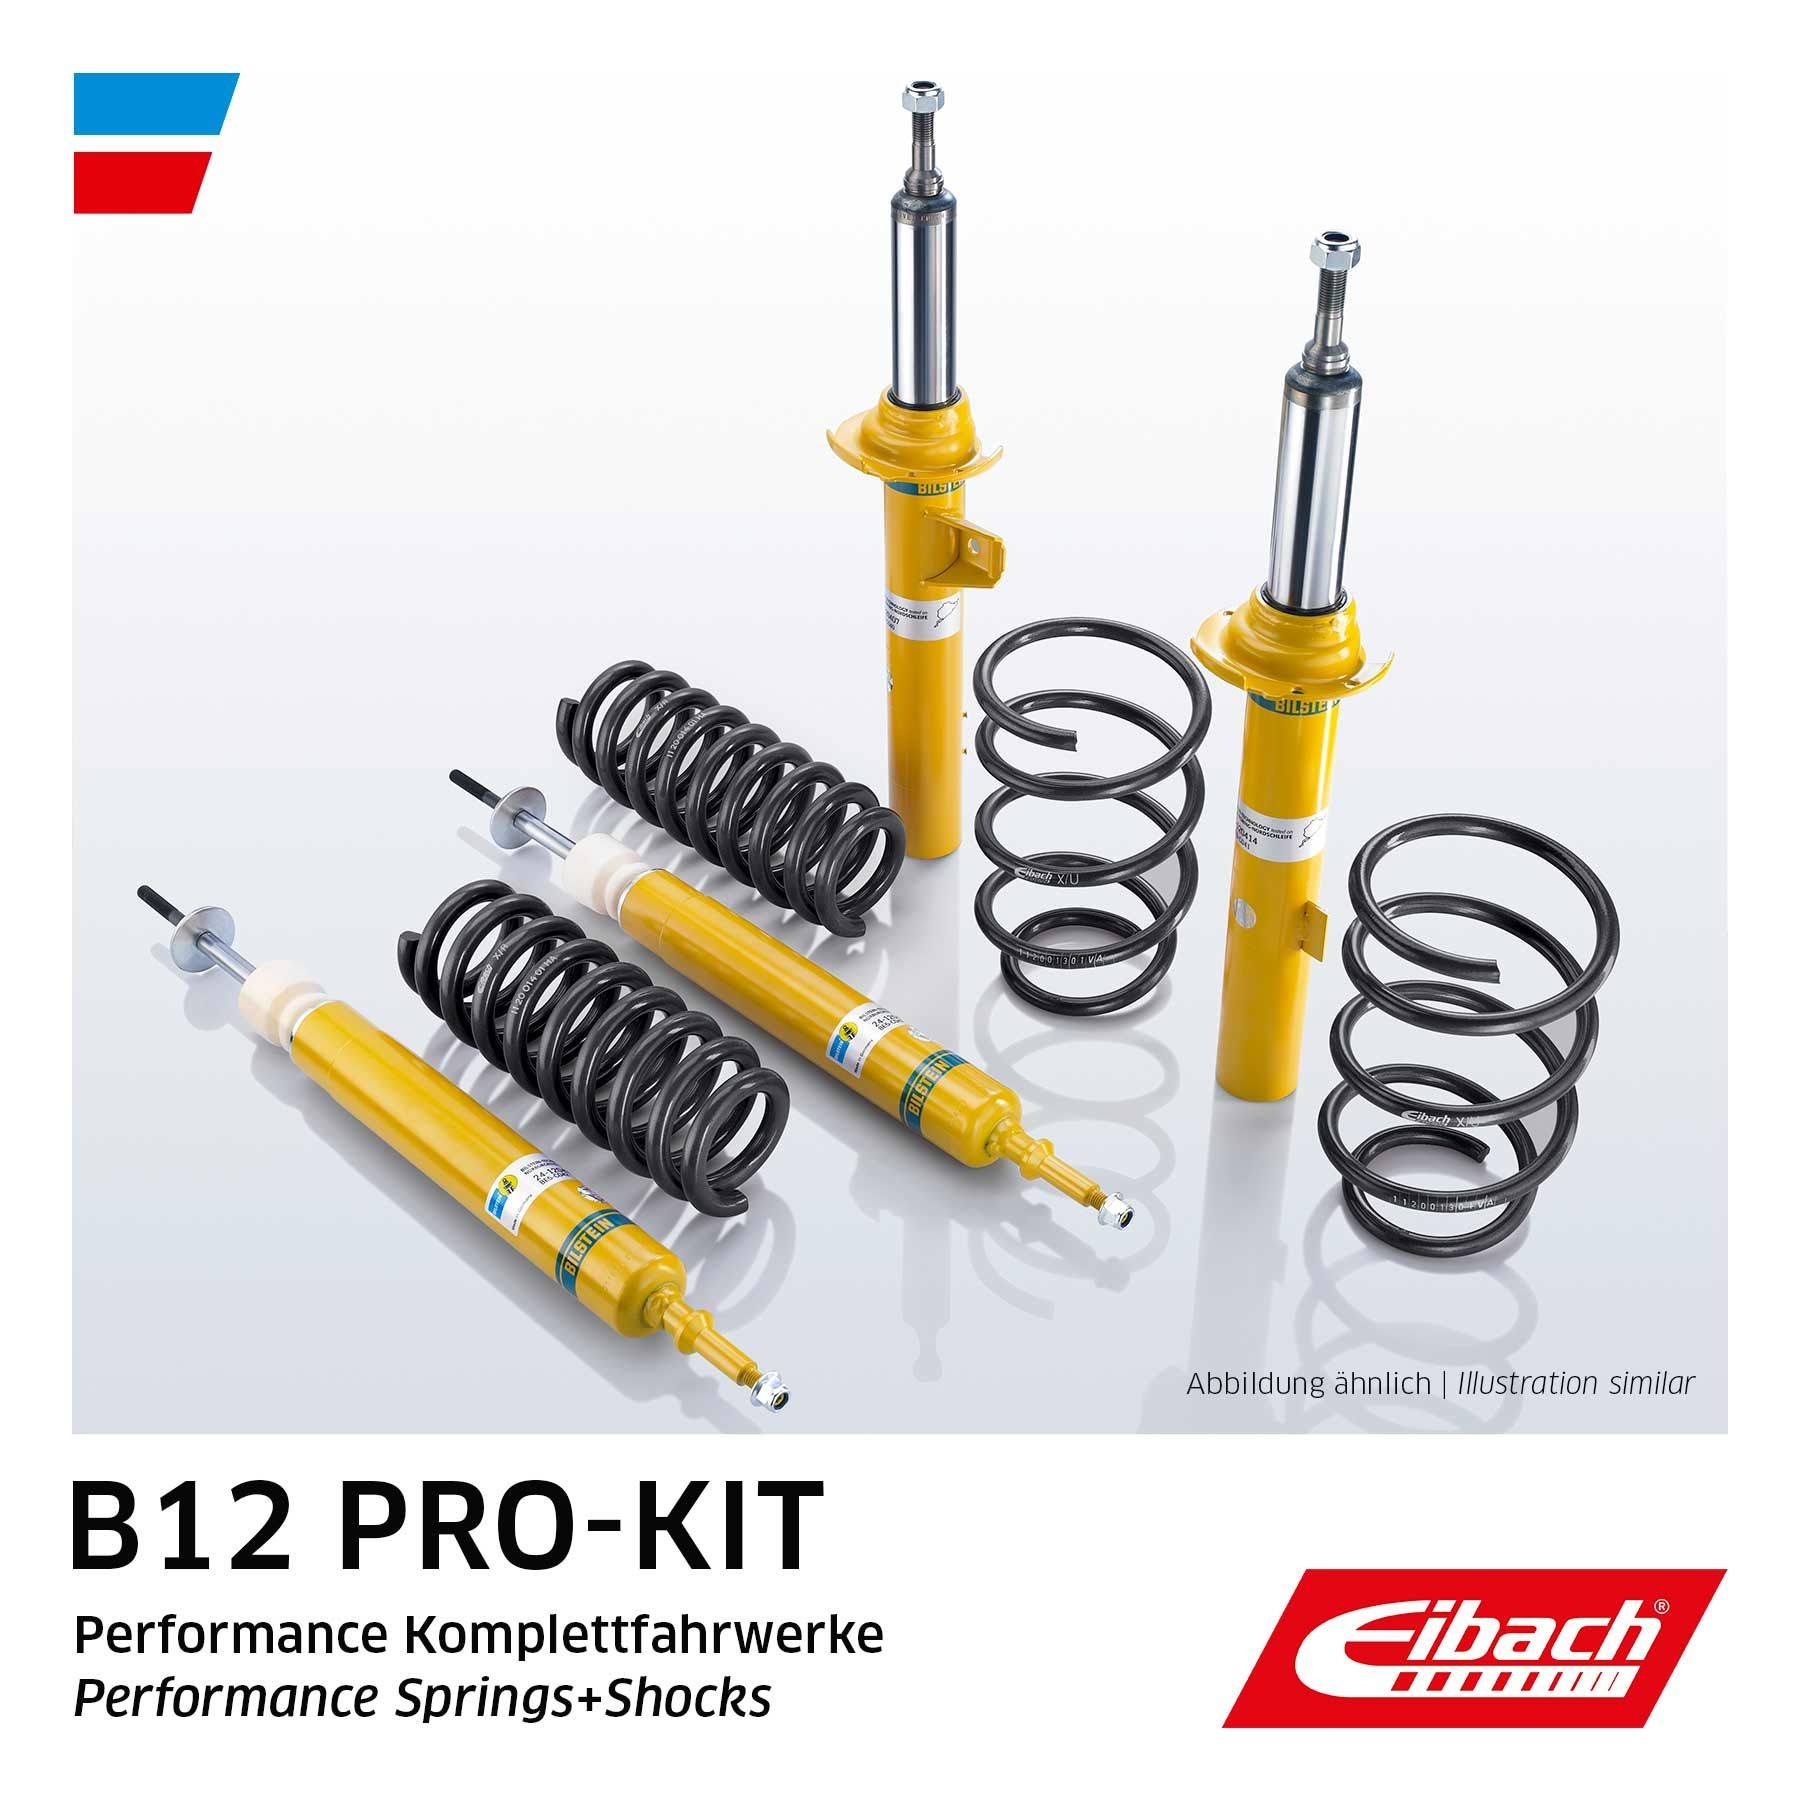 EIBACH E90-15-021-02-22 VW Suspension kit, coil springs / shock absorbers